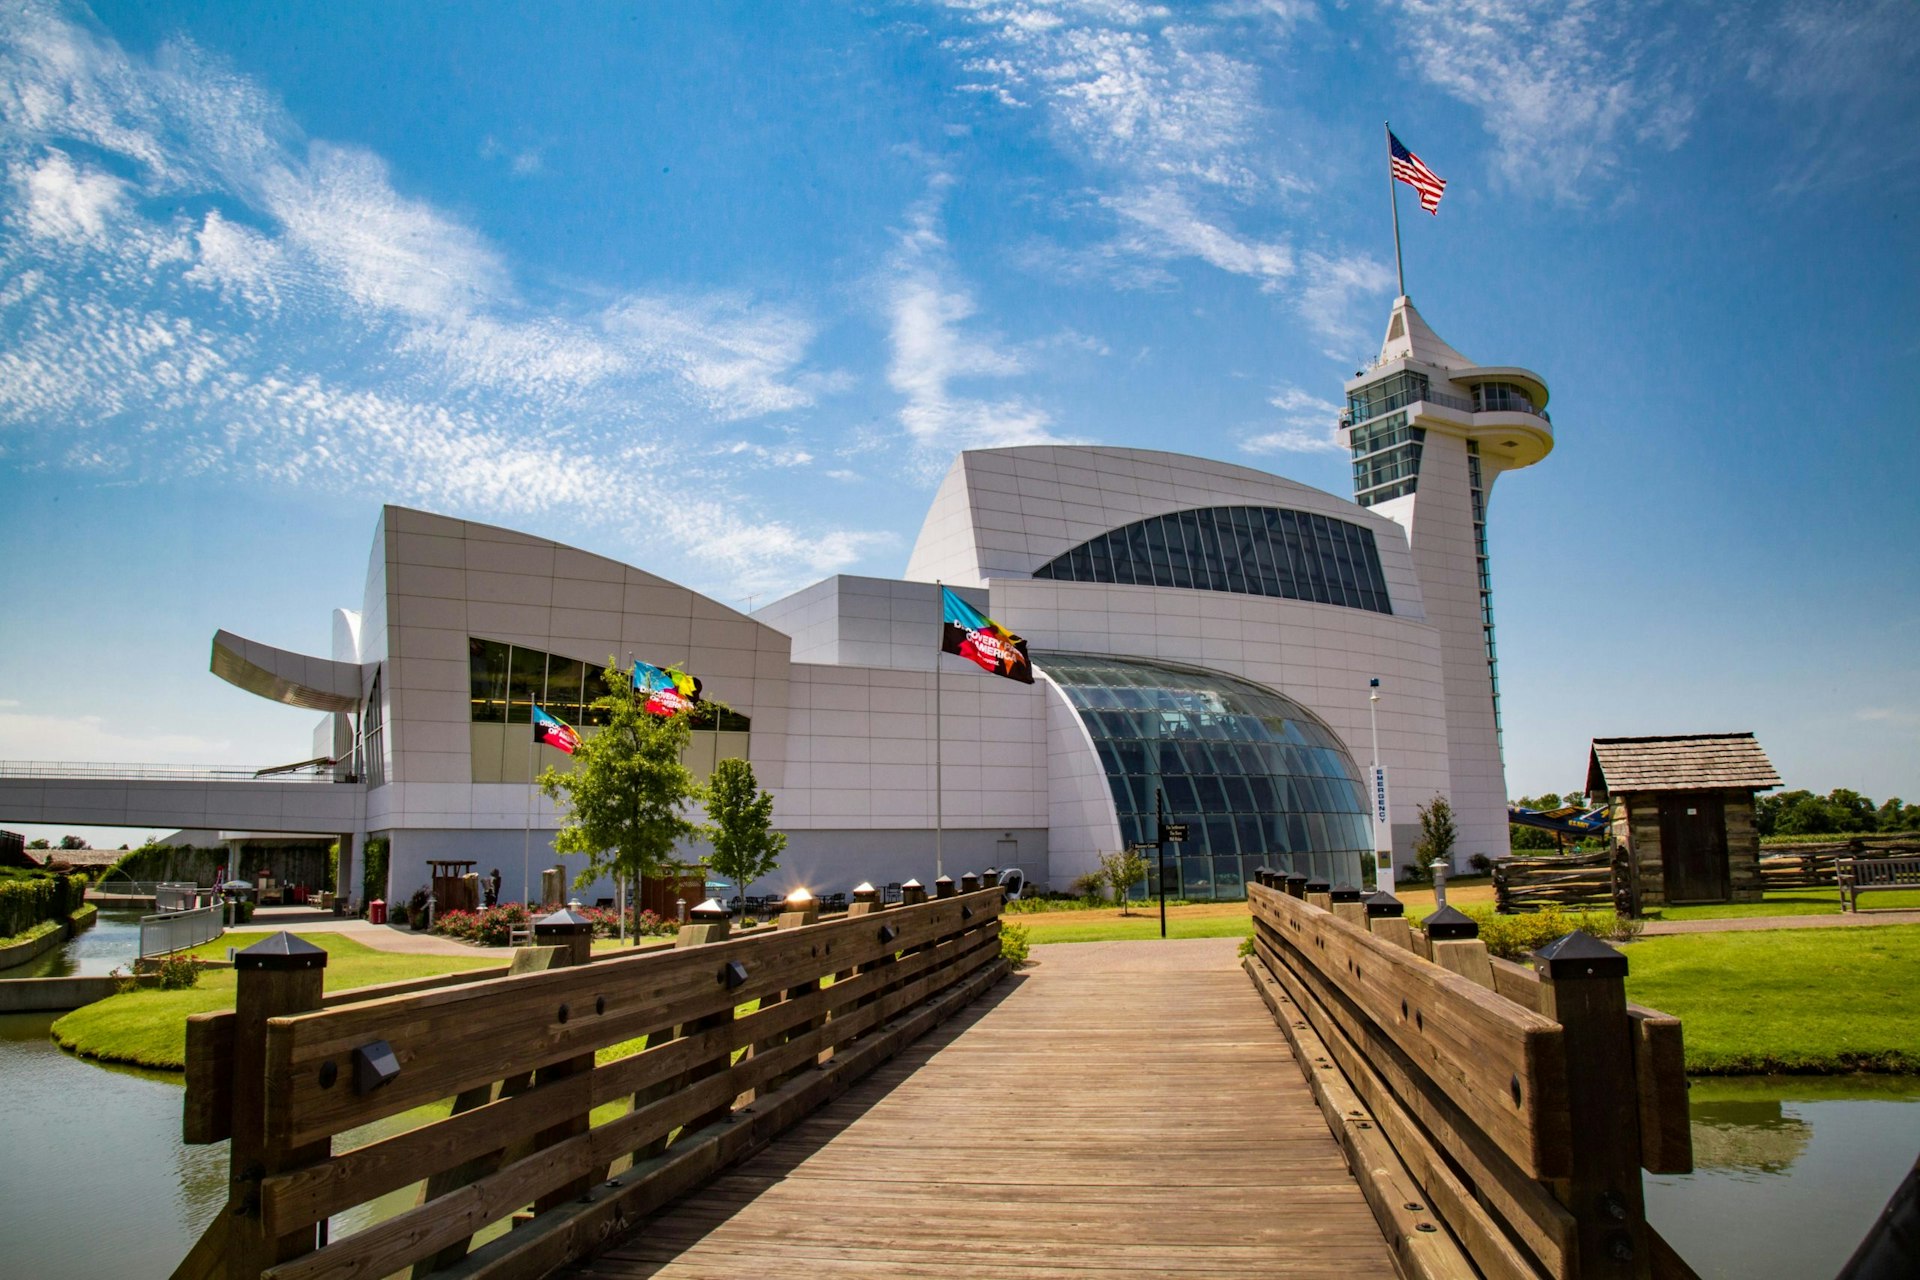 Exterior shot of the large white building of the Discovery Center at the Discovery Park of America